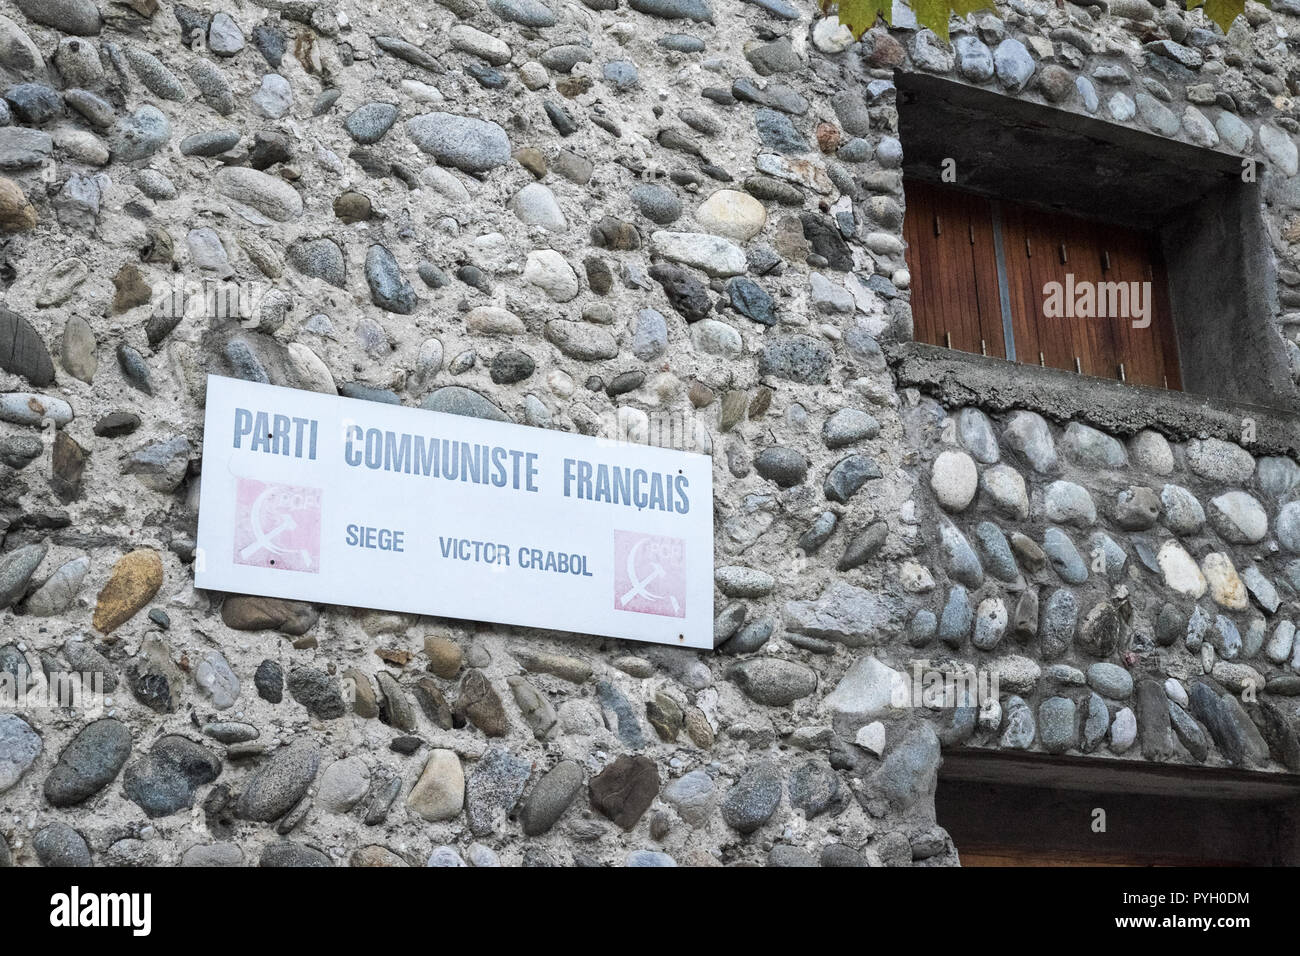 Parti,Communiste,Francais,Communist Party,France,  Headquarters,sign,signage,in,centre,of,Quillan,Aude,South,of,France,French,Europe,European, Stock Photo